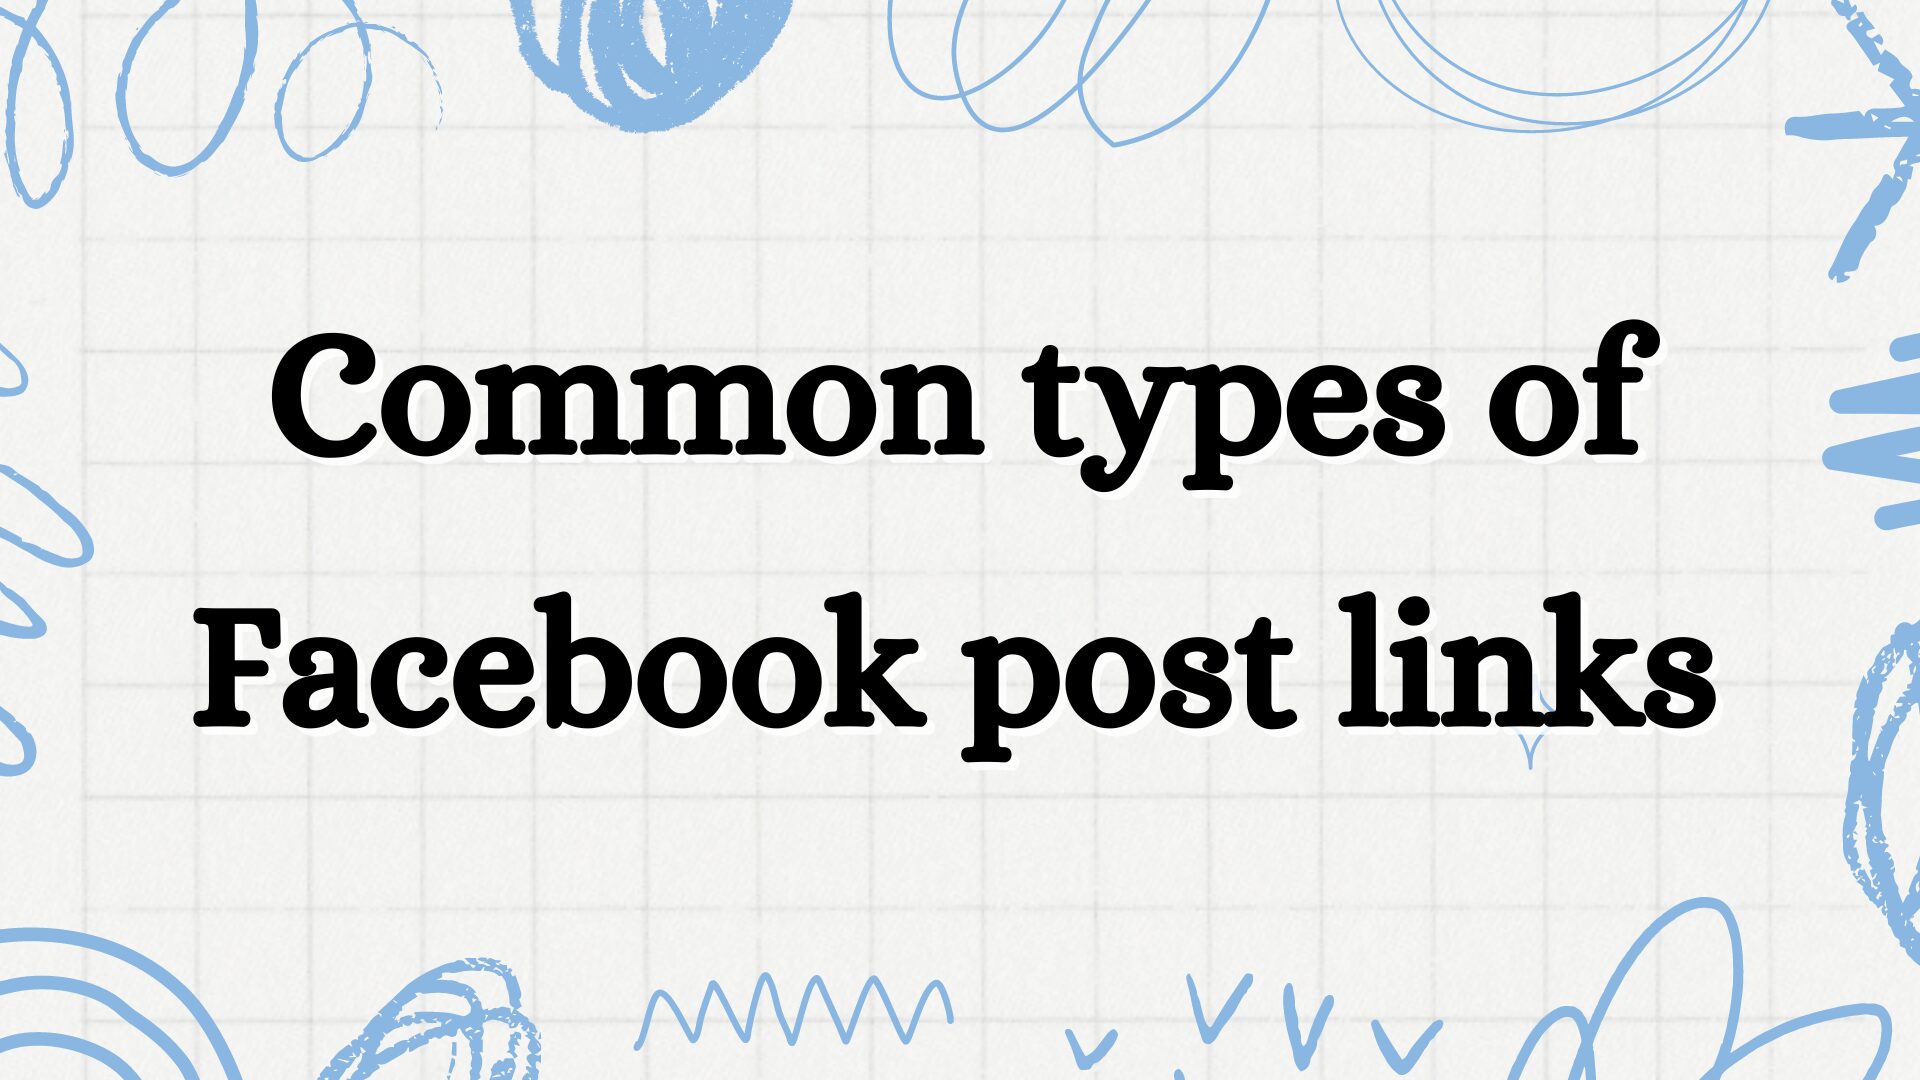 Common types of Facebook post links